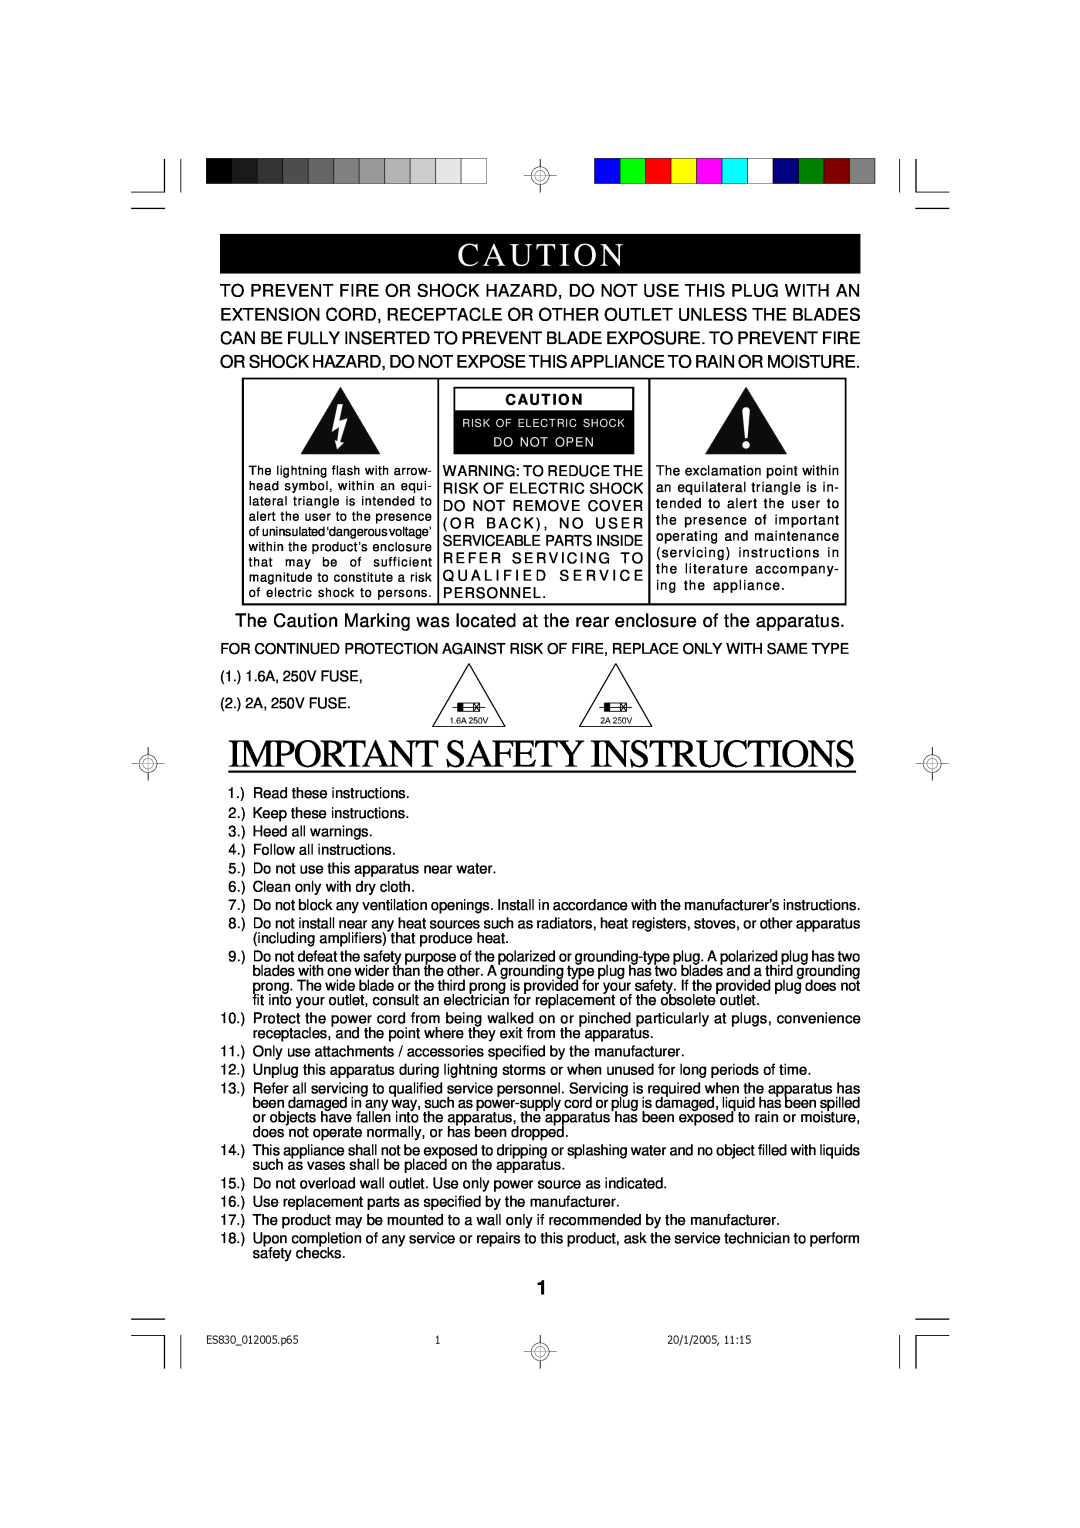 Emerson ES830 owner manual Important Safety Instructions, Caut I On, Caut I O N 